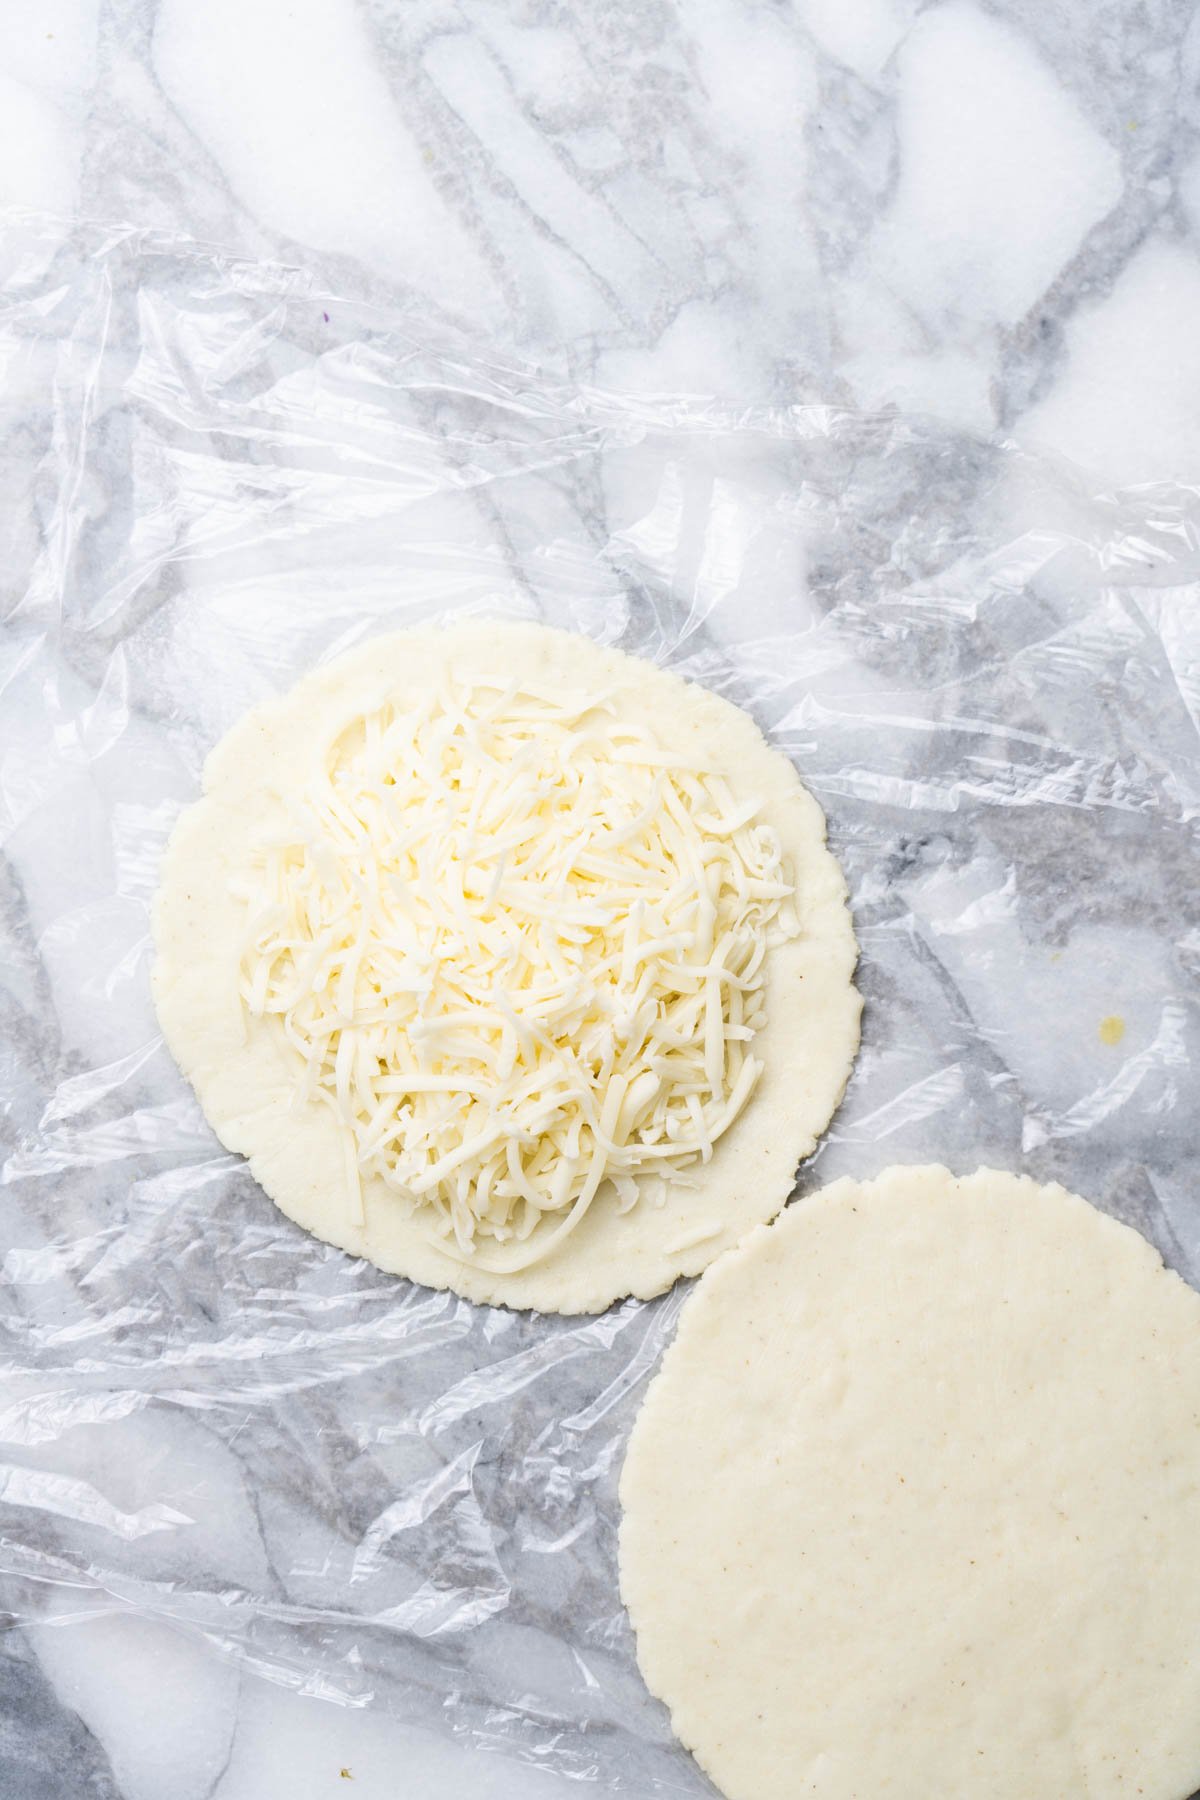 Arepas with cheese.